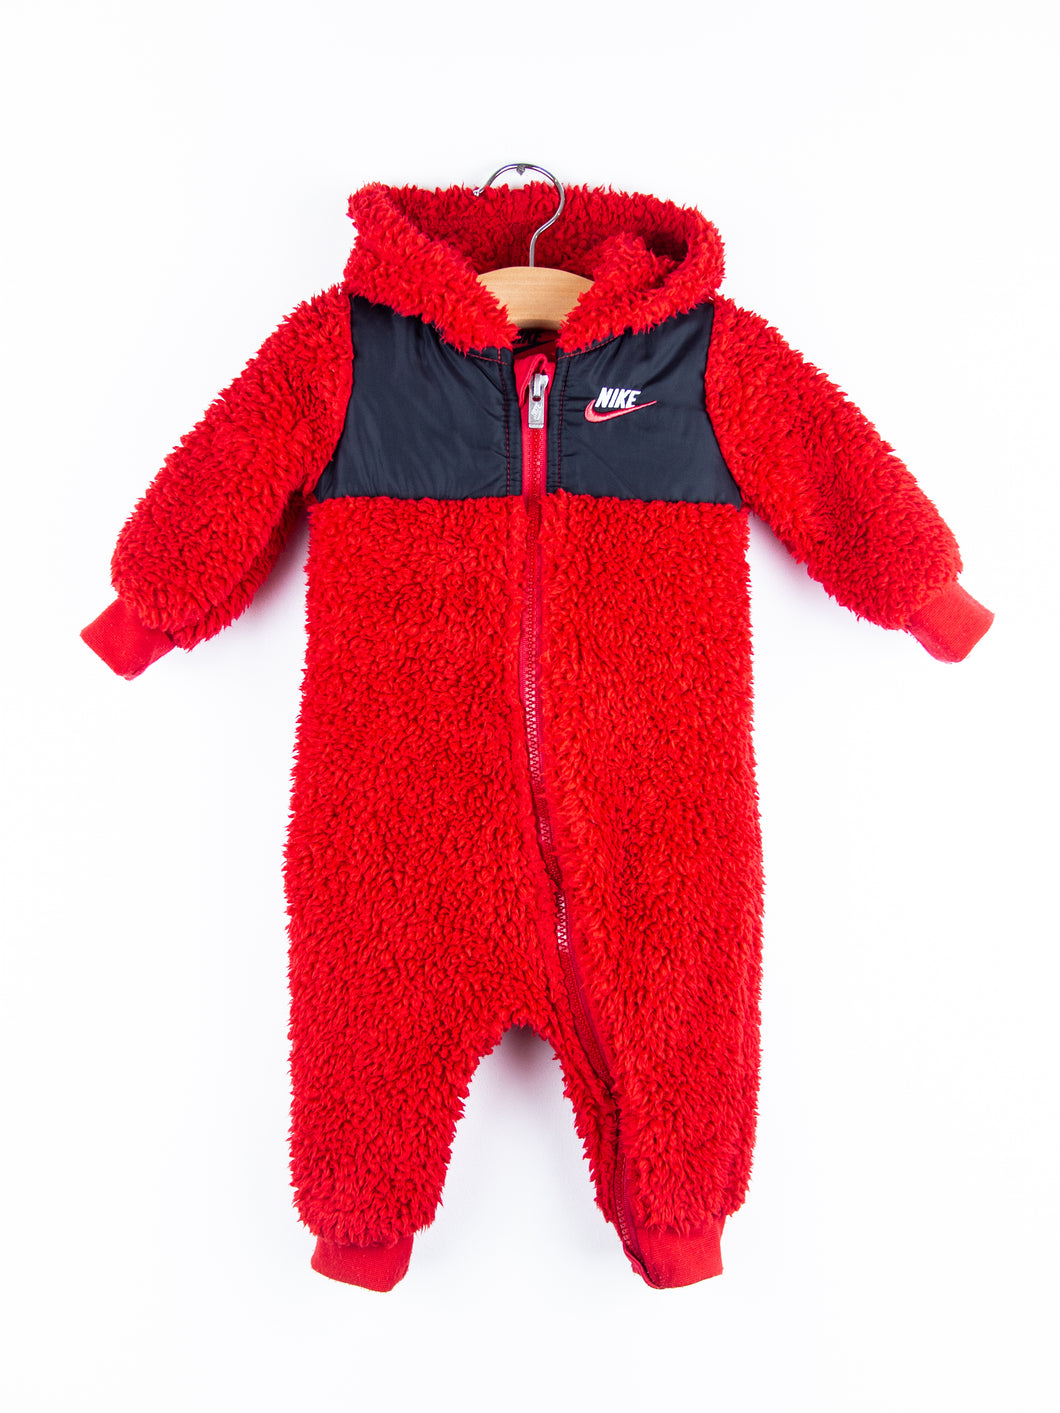 Nike Red Teddy Snowsuit - Age 3-6 months